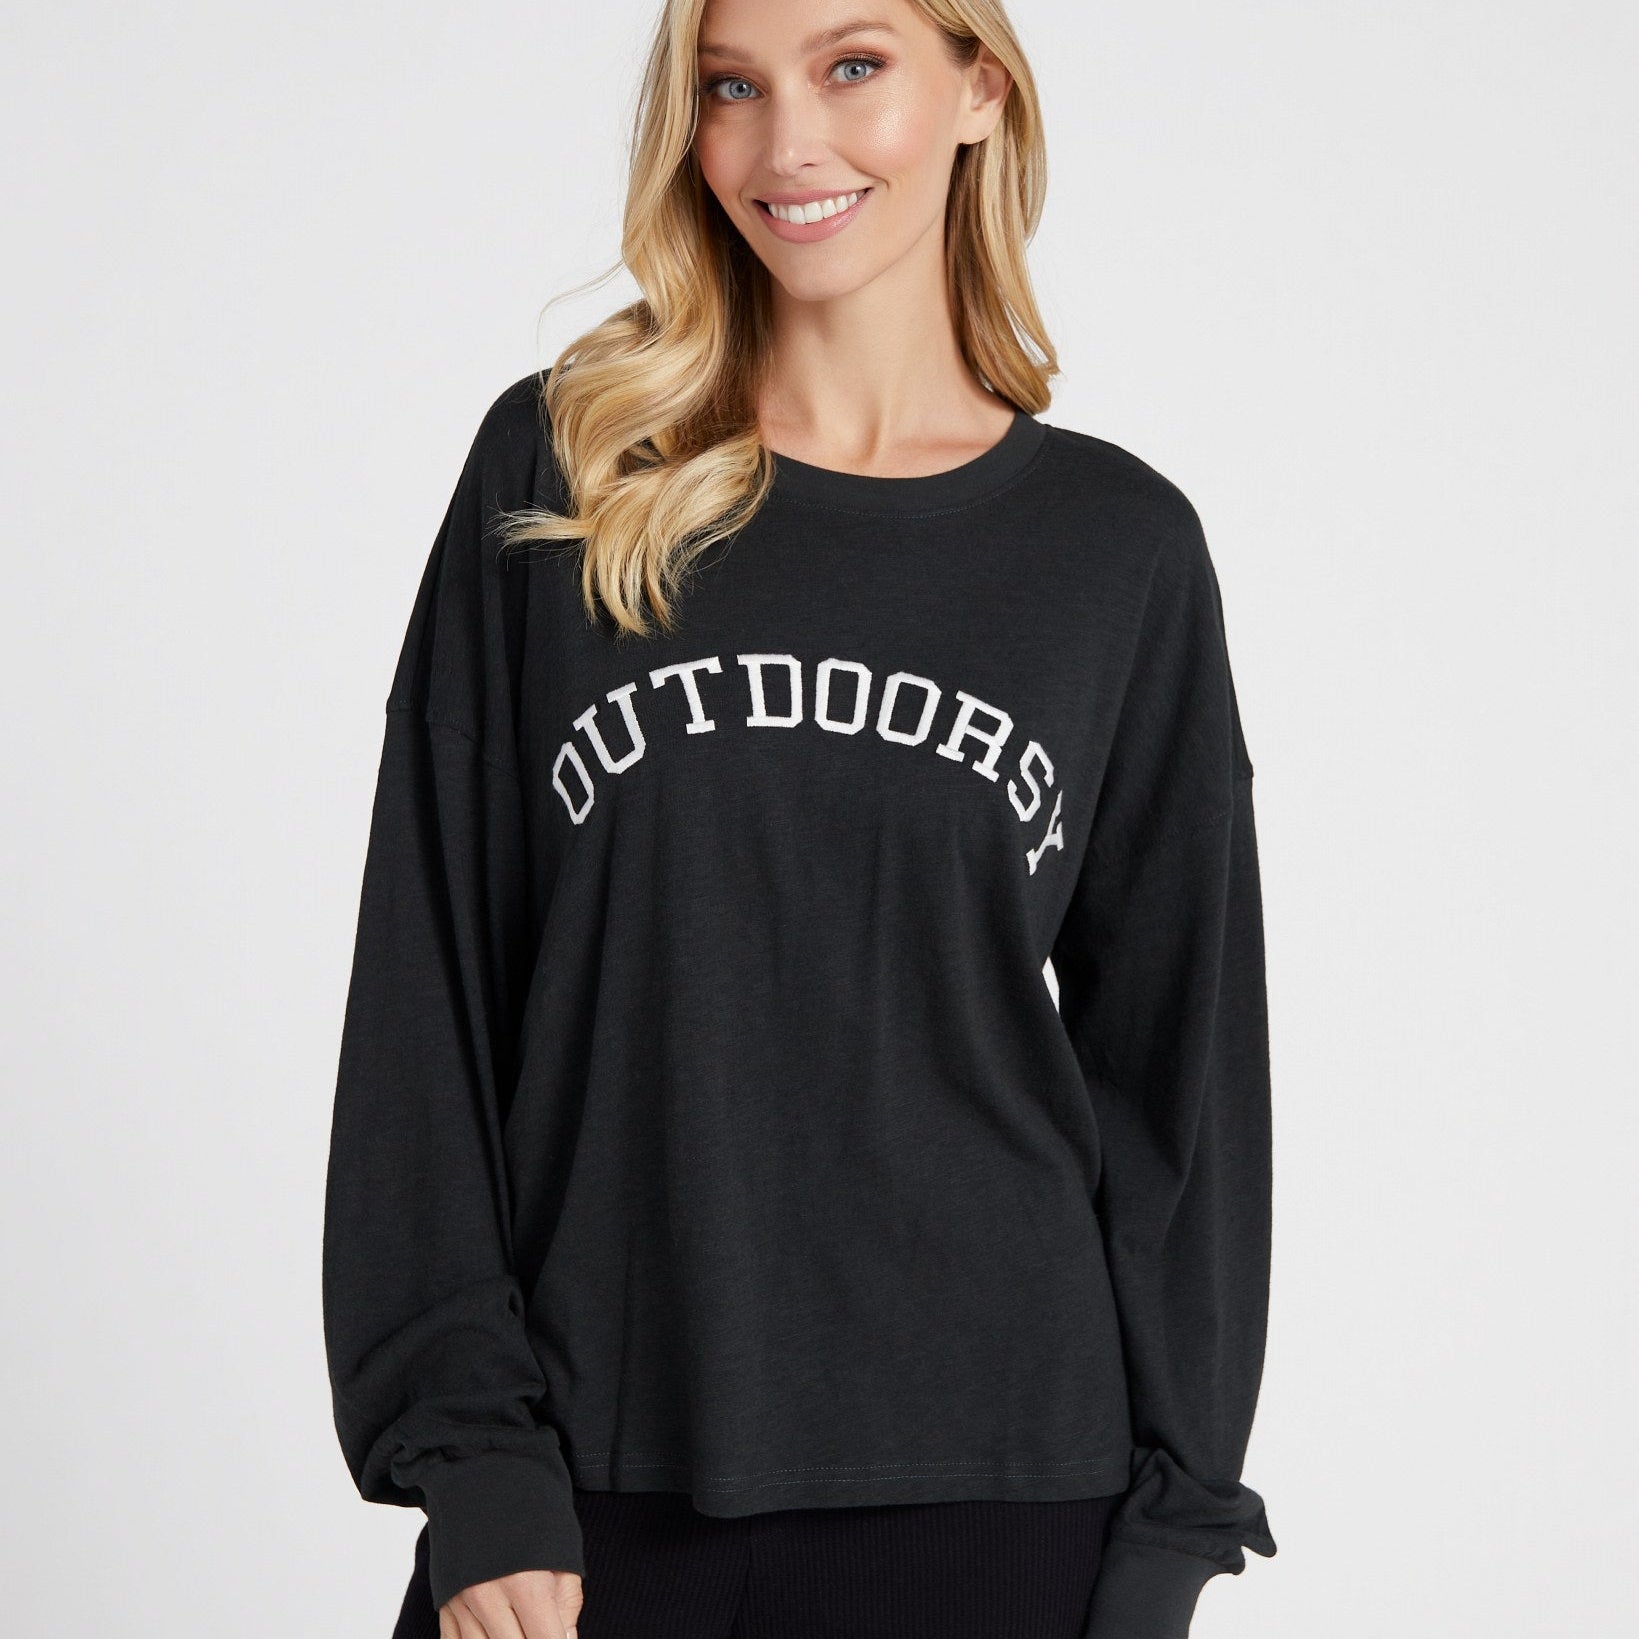 Outdoorsy Long Sleeve Top-Loungewear Tops-Vixen Collection, Day Spa and Women's Boutique Located in Seattle, Washington